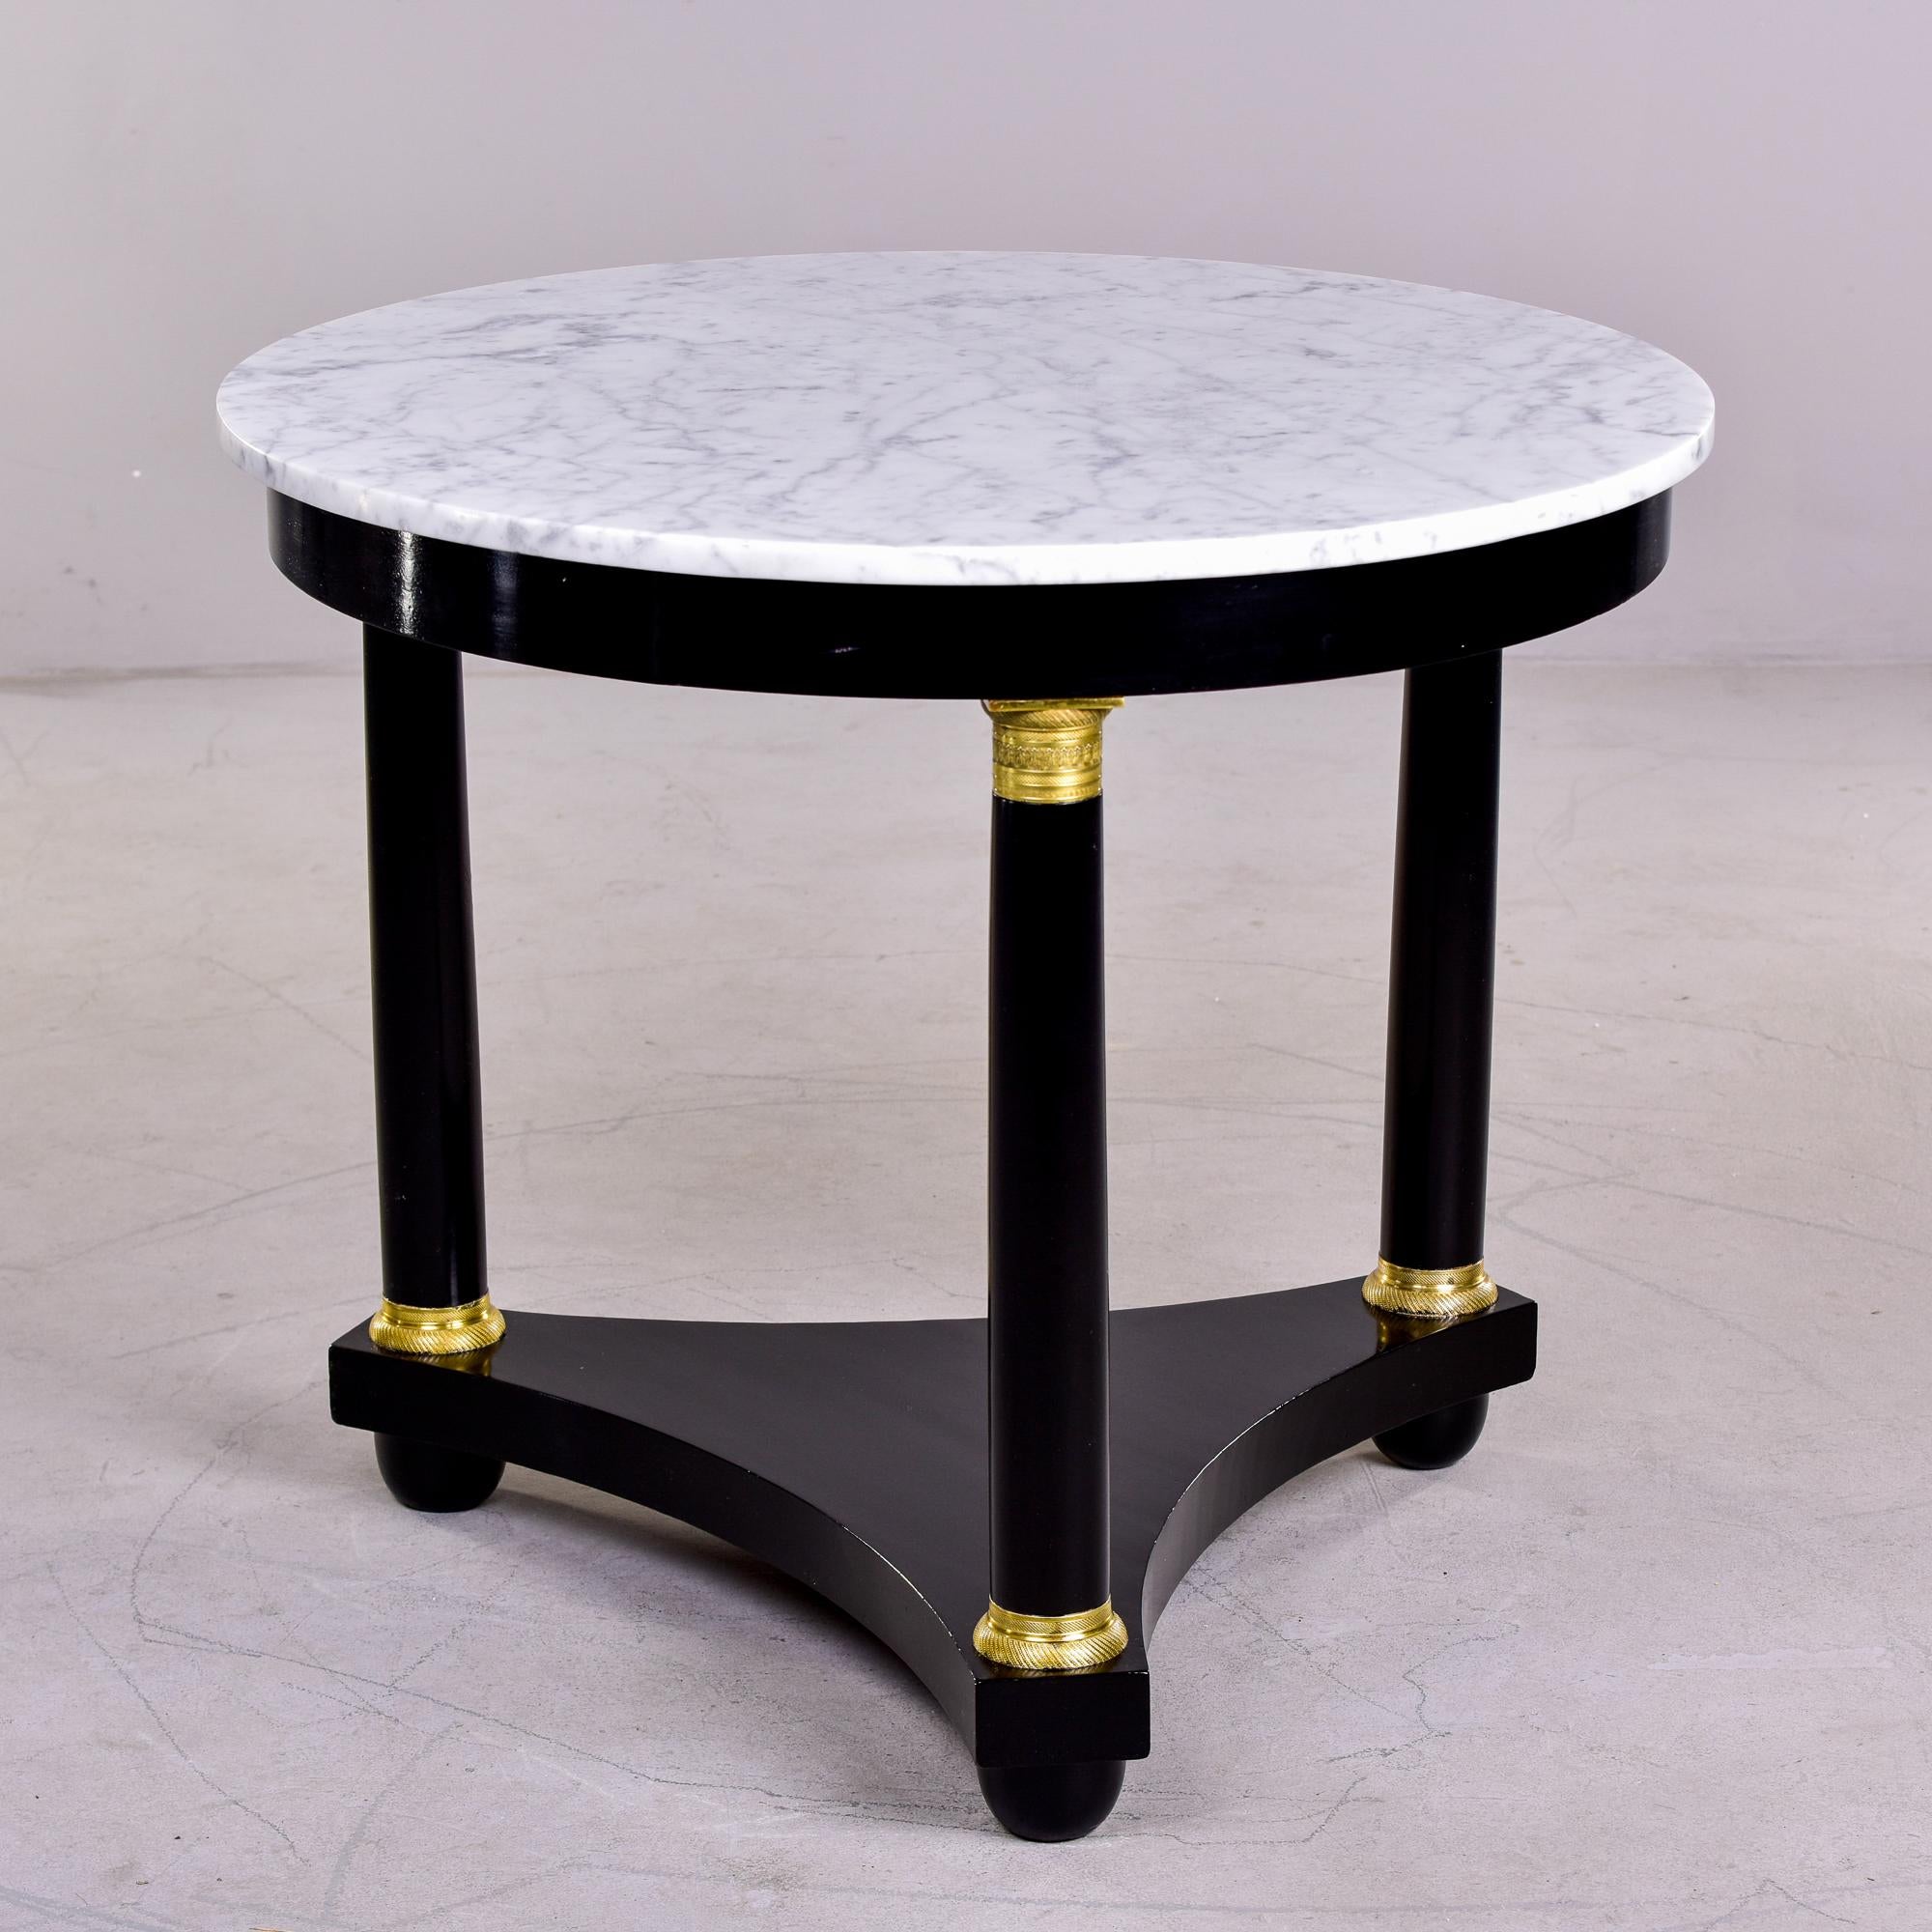 Found in France, this circa 1920s Louis XVI style side table has a new ebonized finish, three legs with a triangular base, brass trim and a white marble top with gray veining. 

Very good antique condition. Minor surface wear to marble and wood.